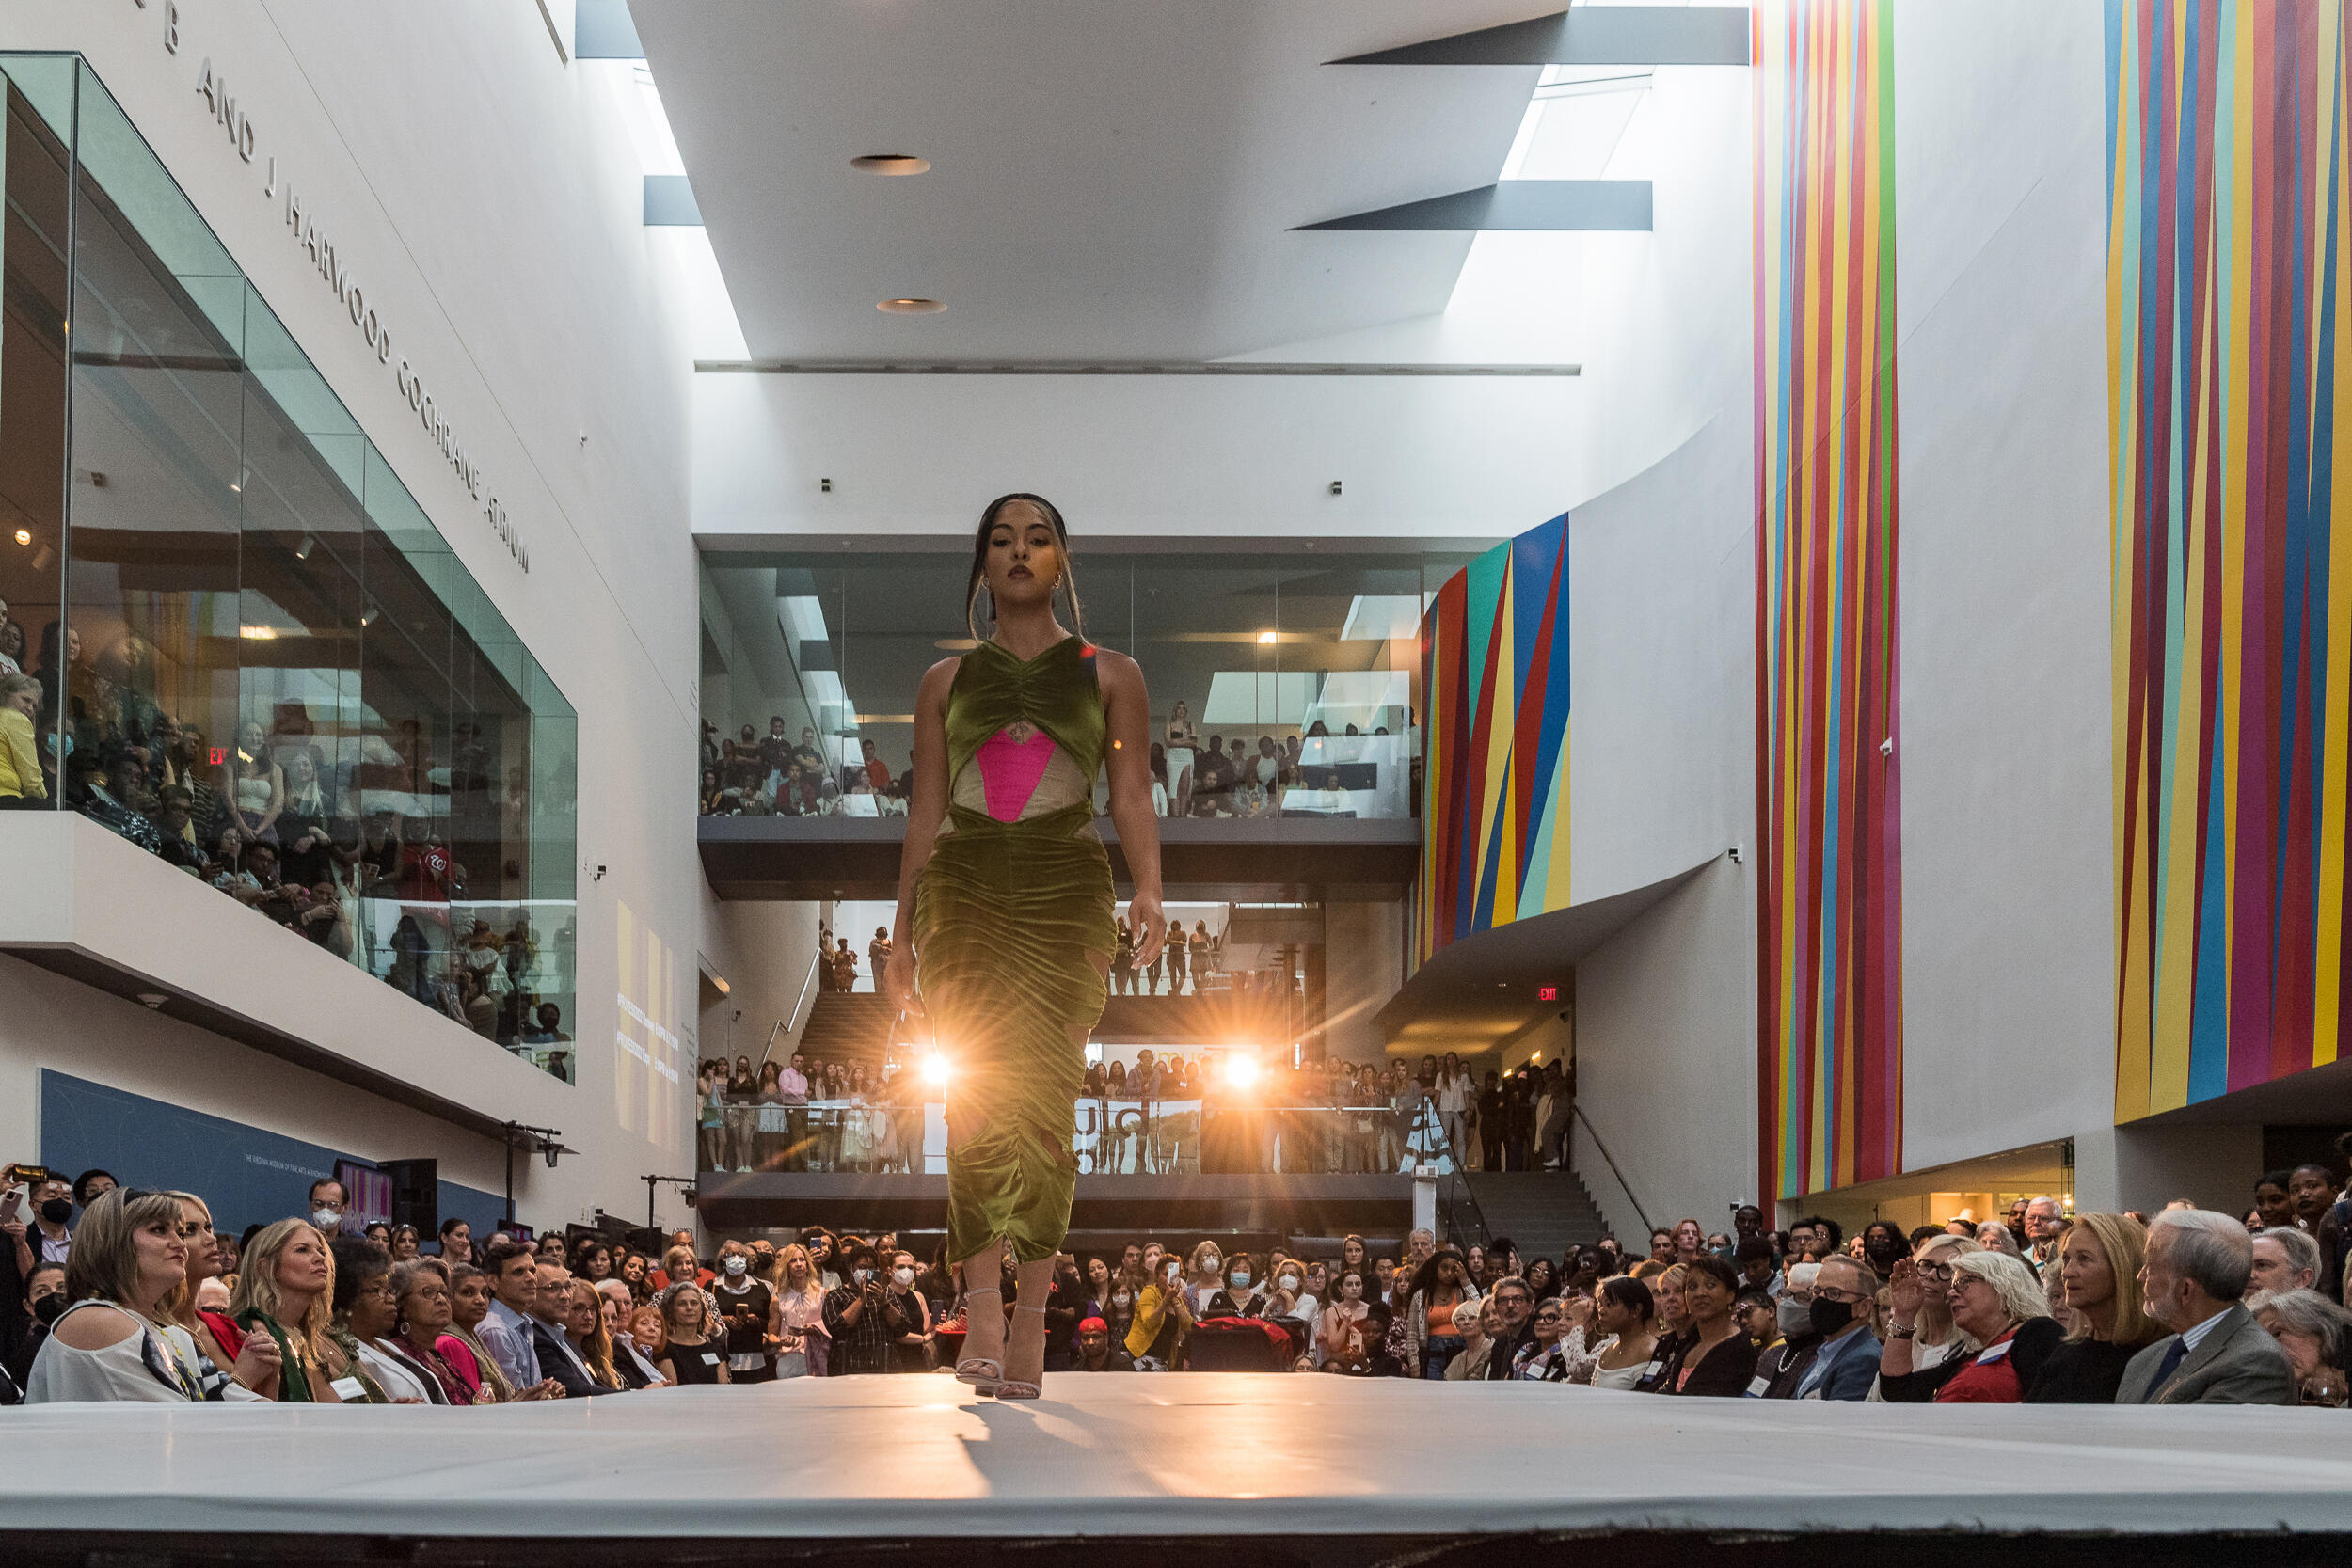 A model walks along a runway in a large brightly-lit atrium lined with art on the walls as an audience watches on either side of the runway.